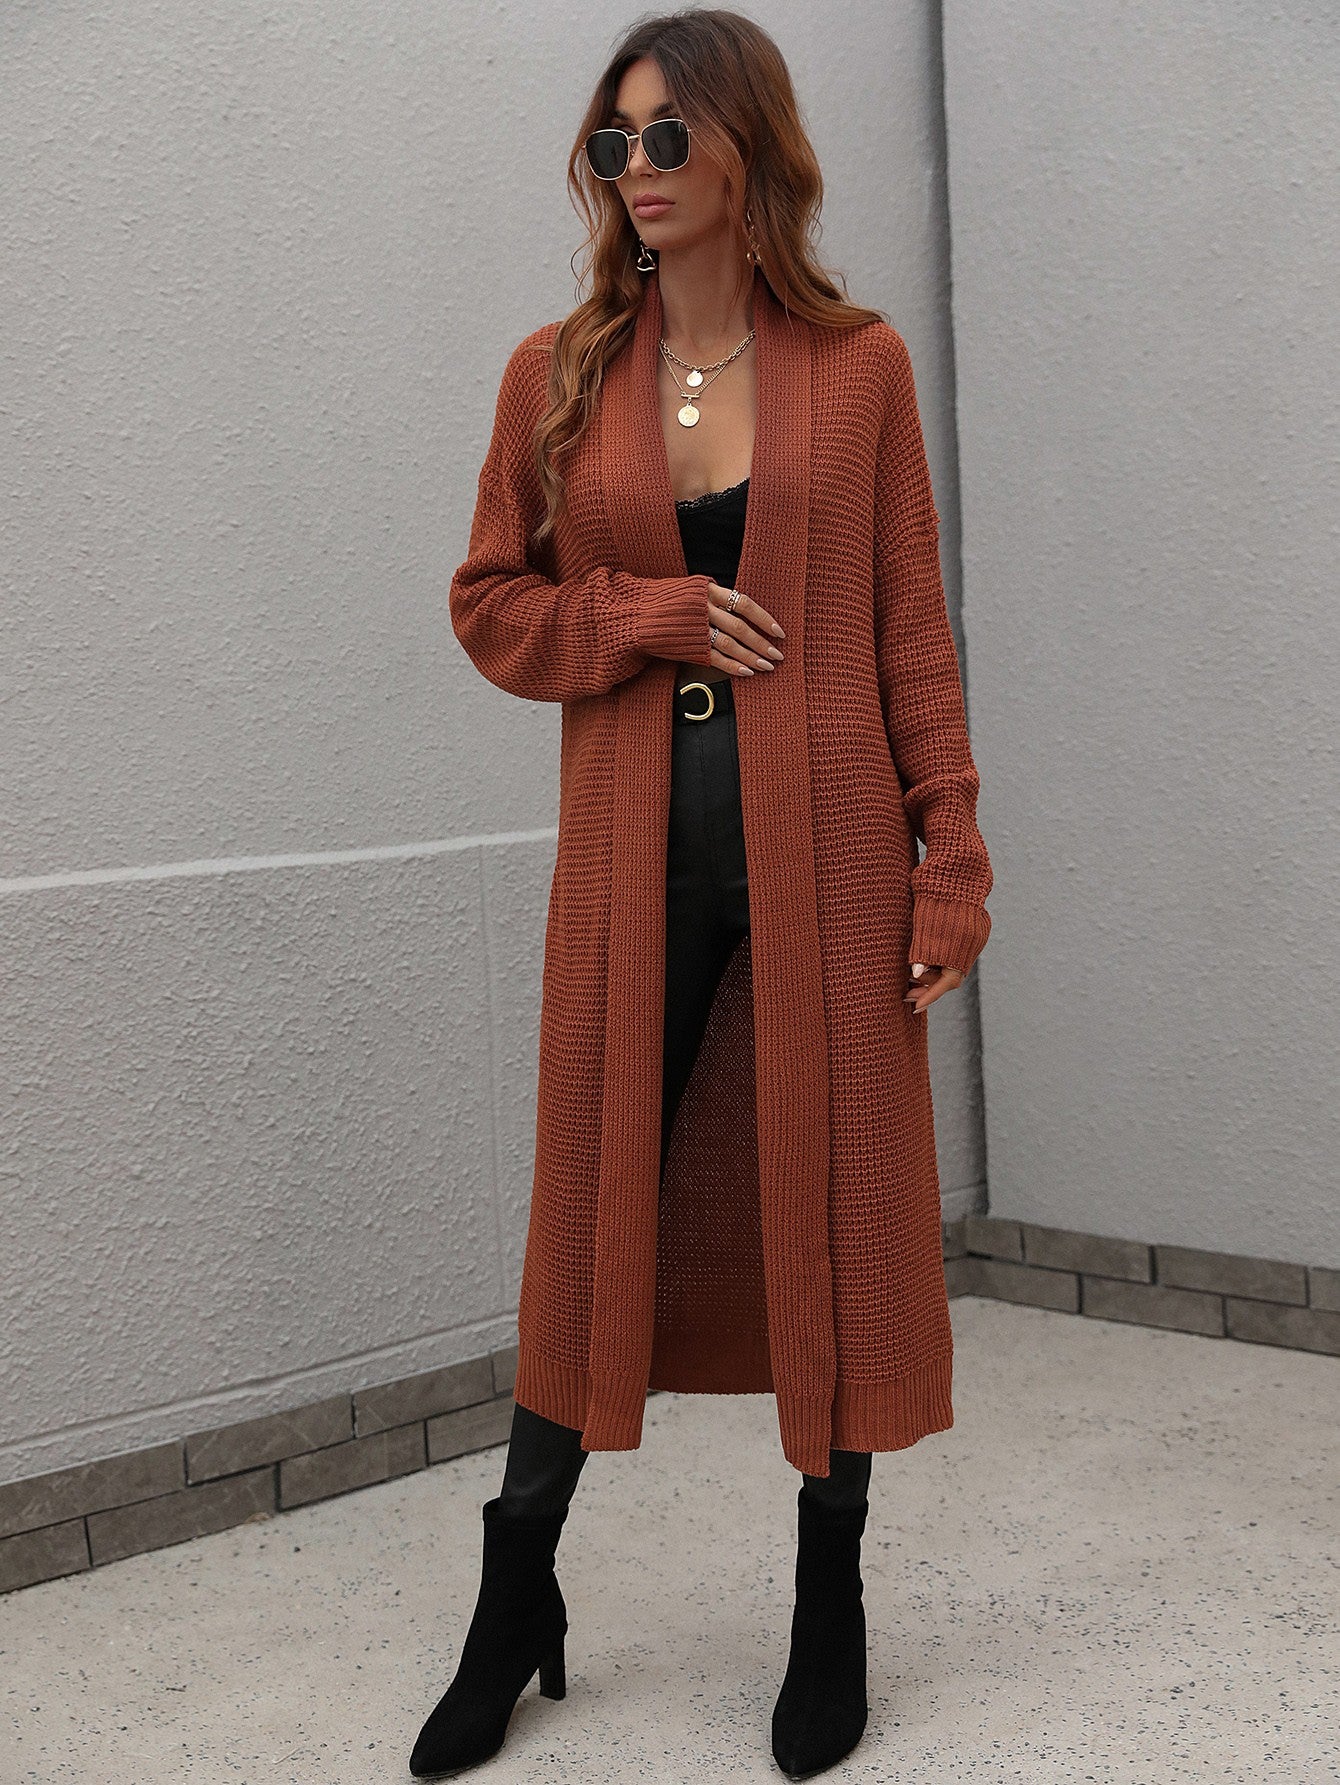 Waffle Knit Open Front Duster Cardigan With Pockets in Black, Red, Cream, Sienna, or Lavender